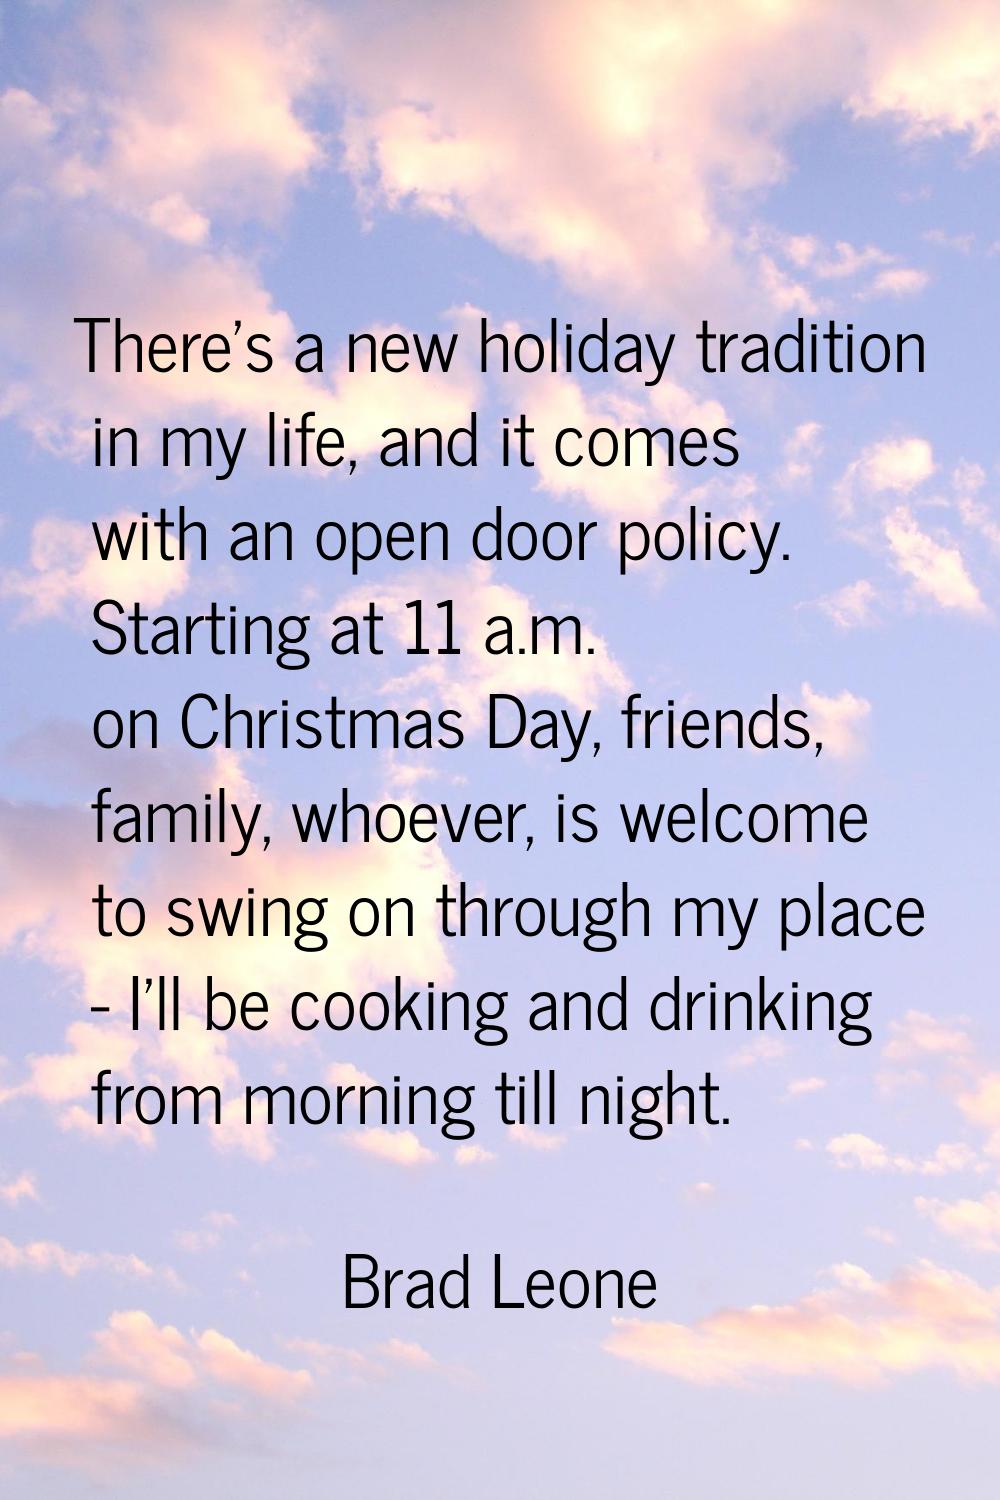 There's a new holiday tradition in my life, and it comes with an open door policy. Starting at 11 a